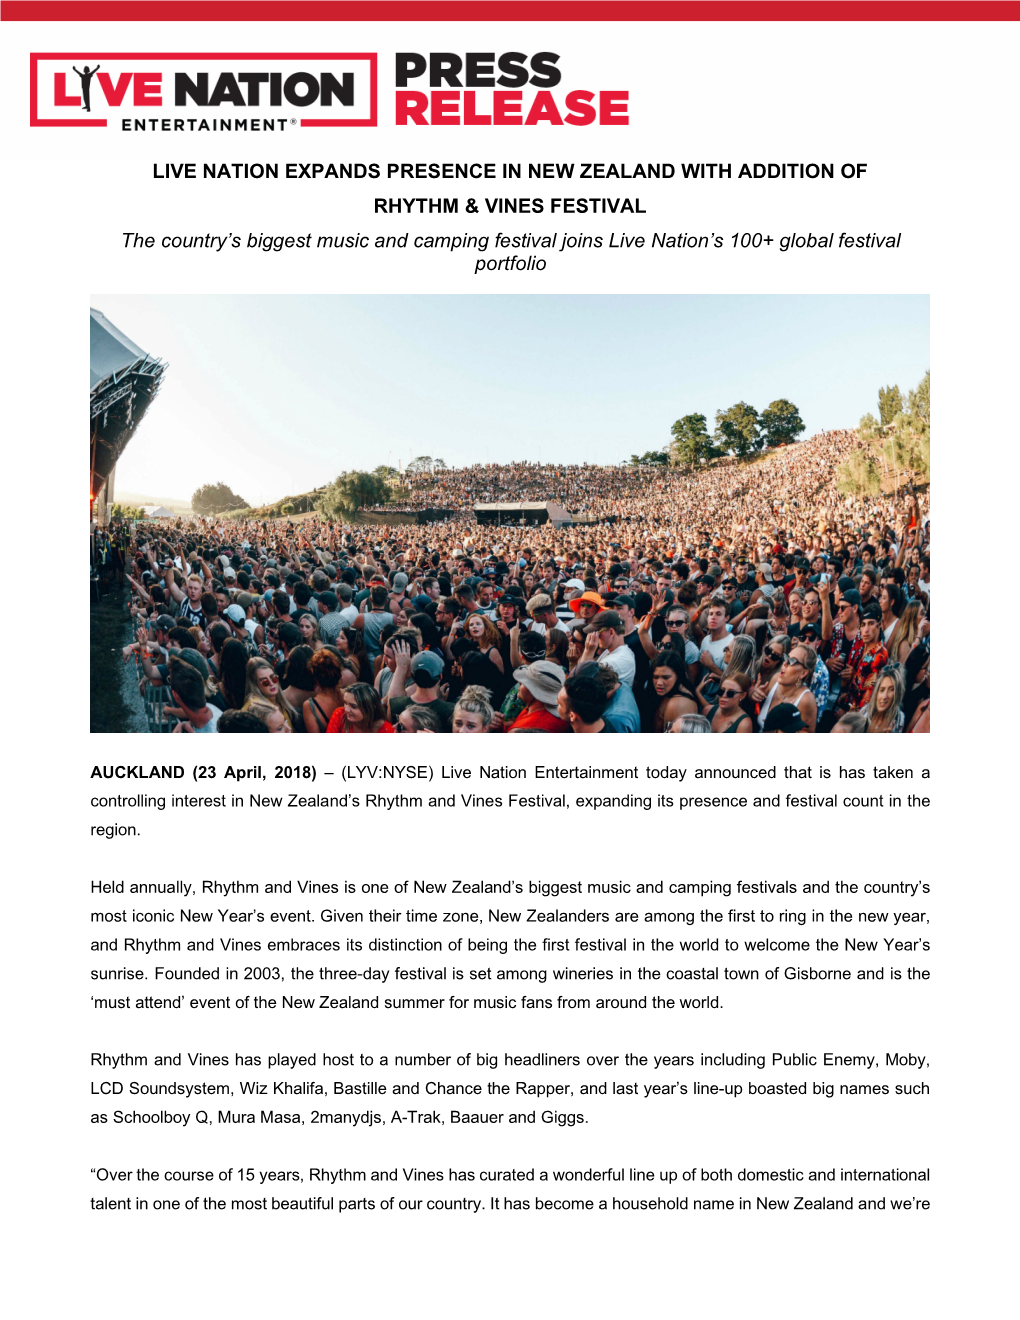 LIVE NATION EXPANDS PRESENCE in NEW ZEALAND with ADDITION of RHYTHM & VINES FESTIVAL the Country's Biggest Music and Camp